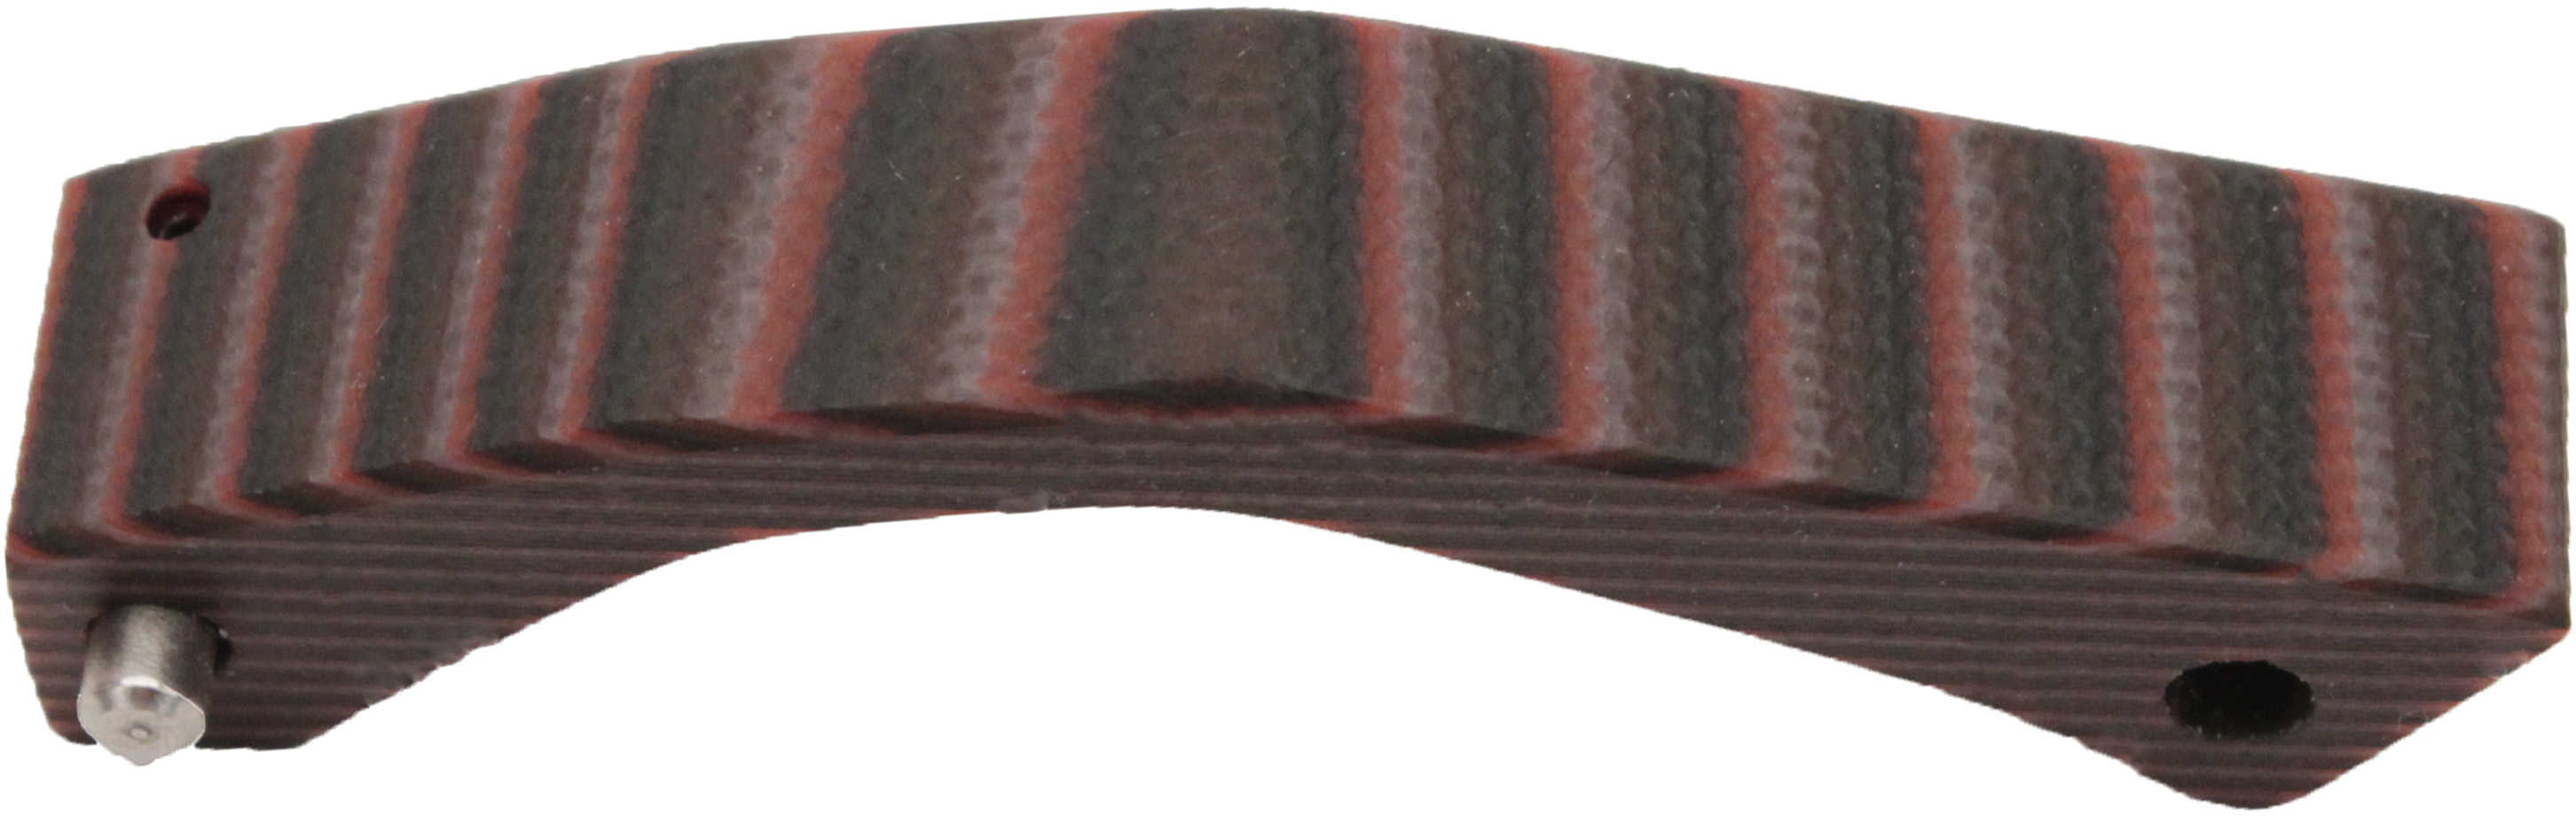 Hogue AR15 Cont Trigger Guard G10 G-Mascus Red Lava Md: 15699